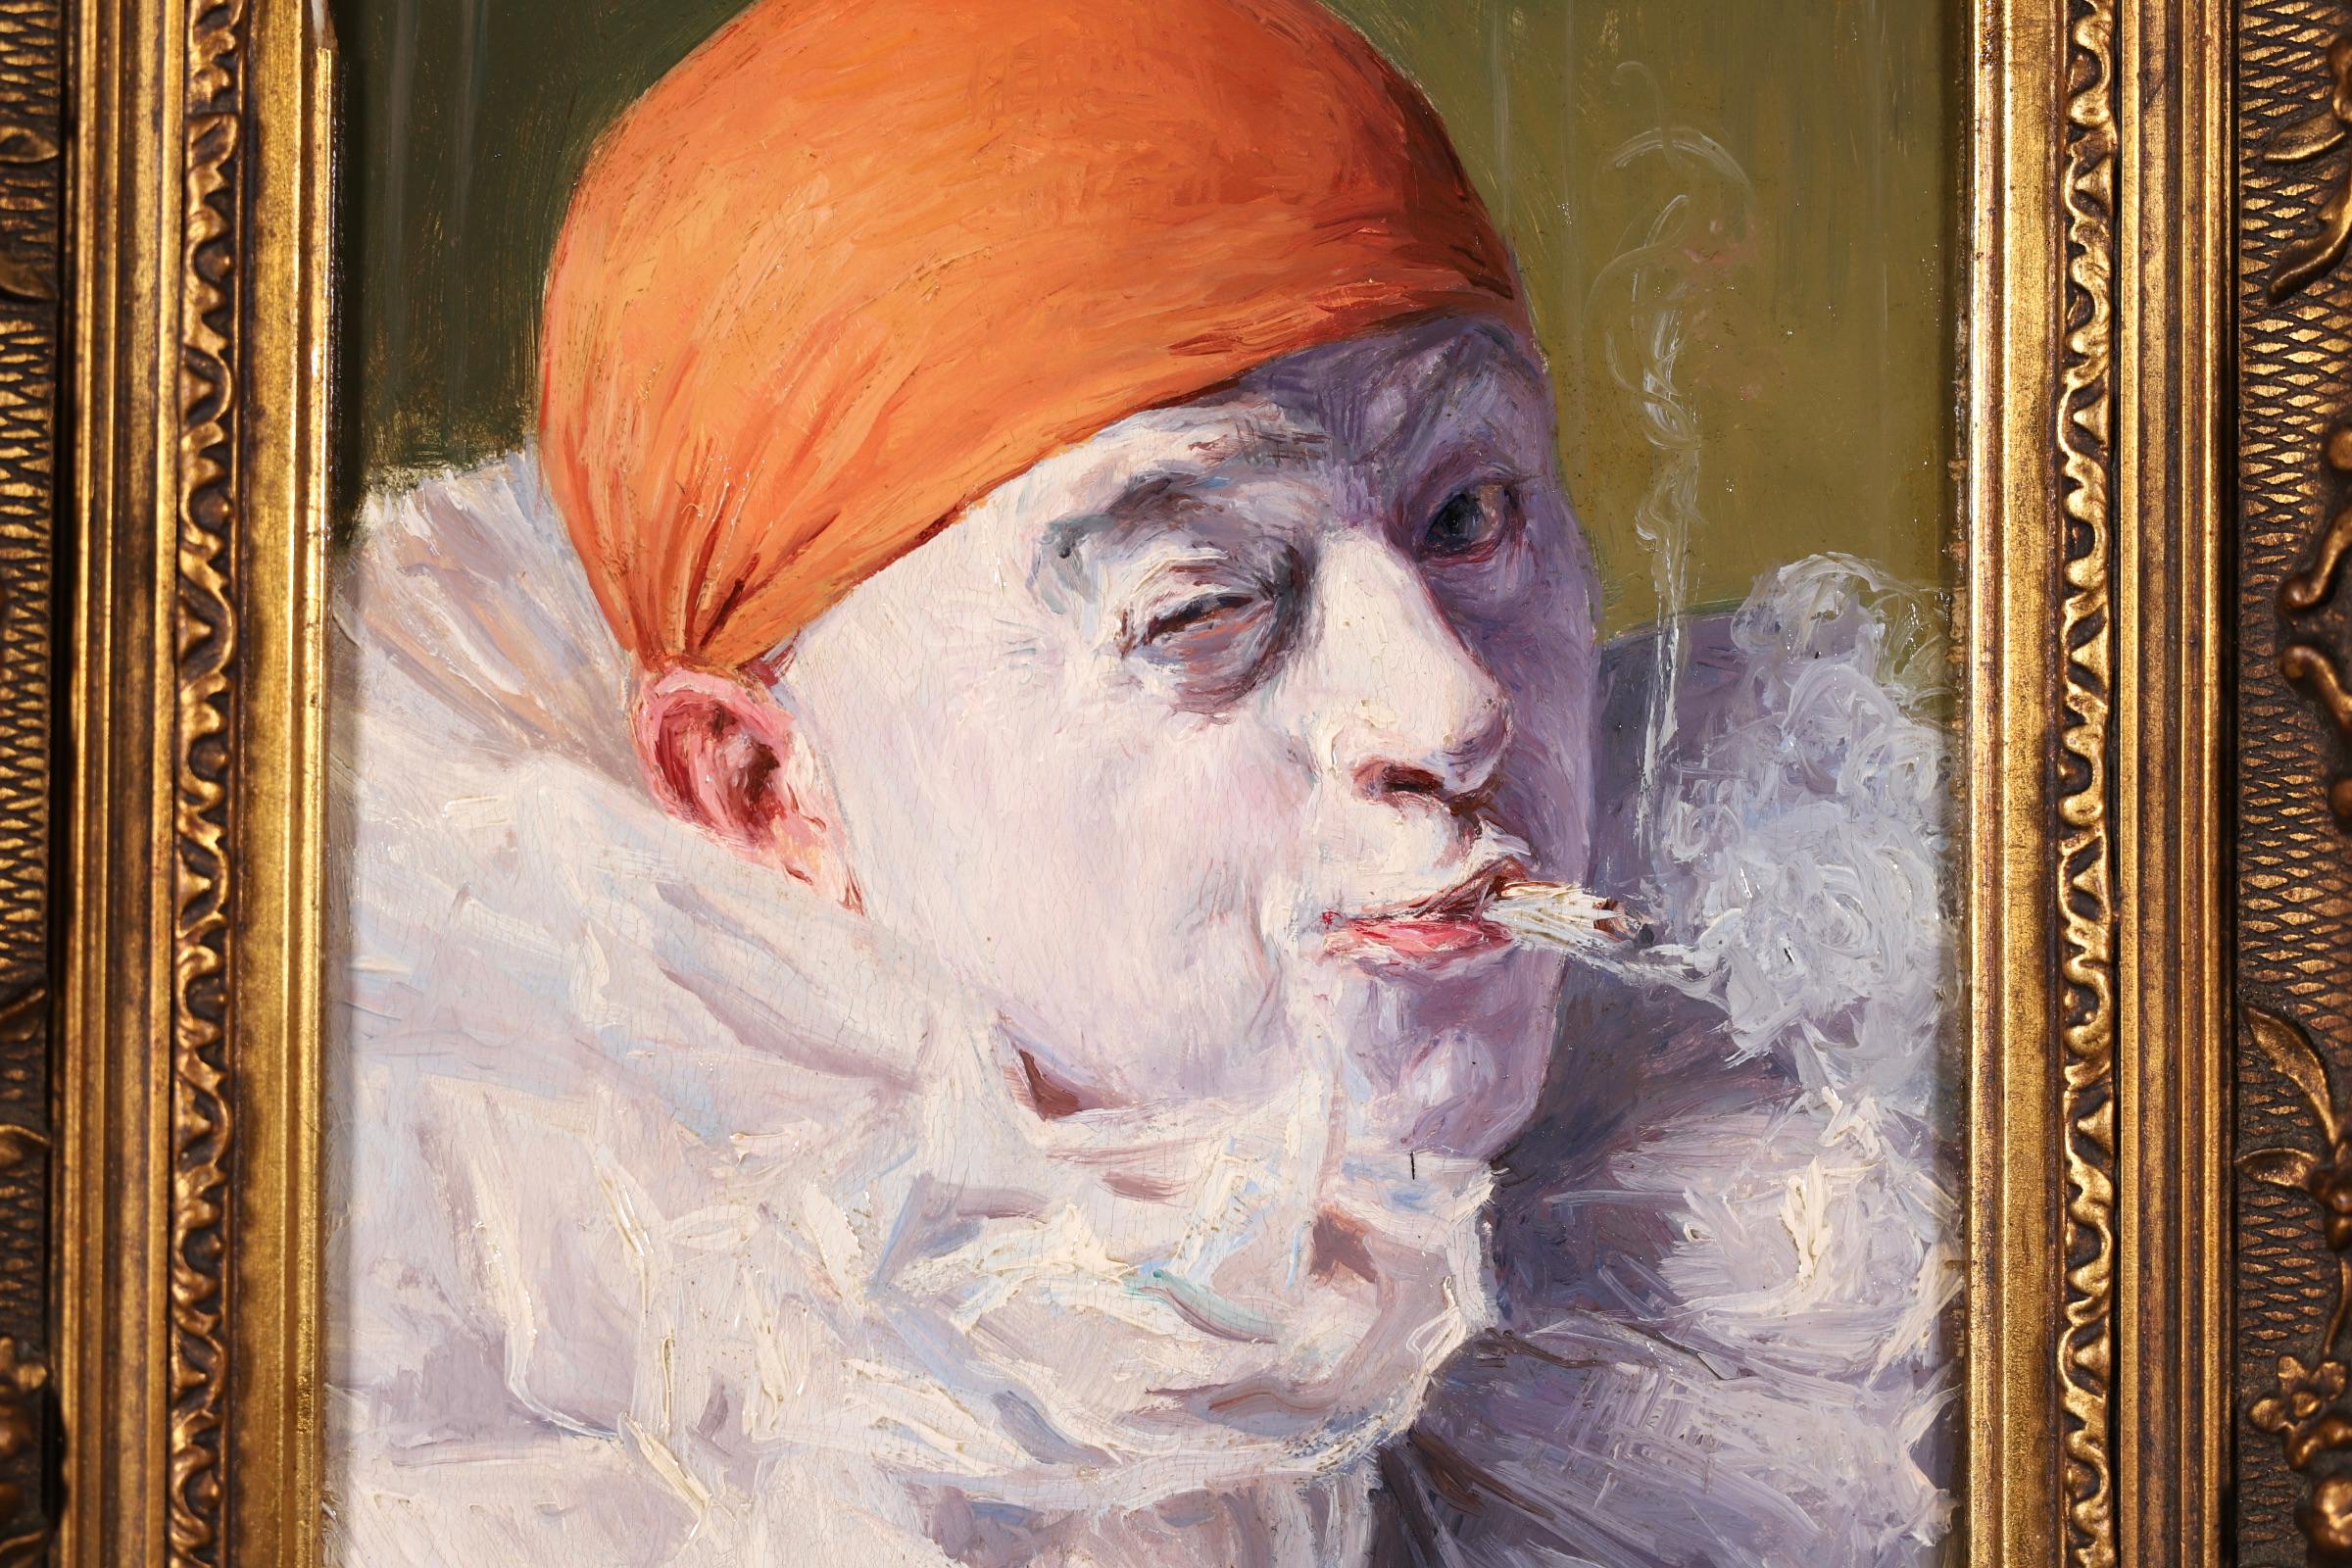 A delightful oil on panel circa 1900 by French impressionist painter Armand Francois Henrion depicting a portrait of a Pierrot - a French clown - wearing white ruffles and an orange hat and smoking a cigarette. The portrait is set against an olive